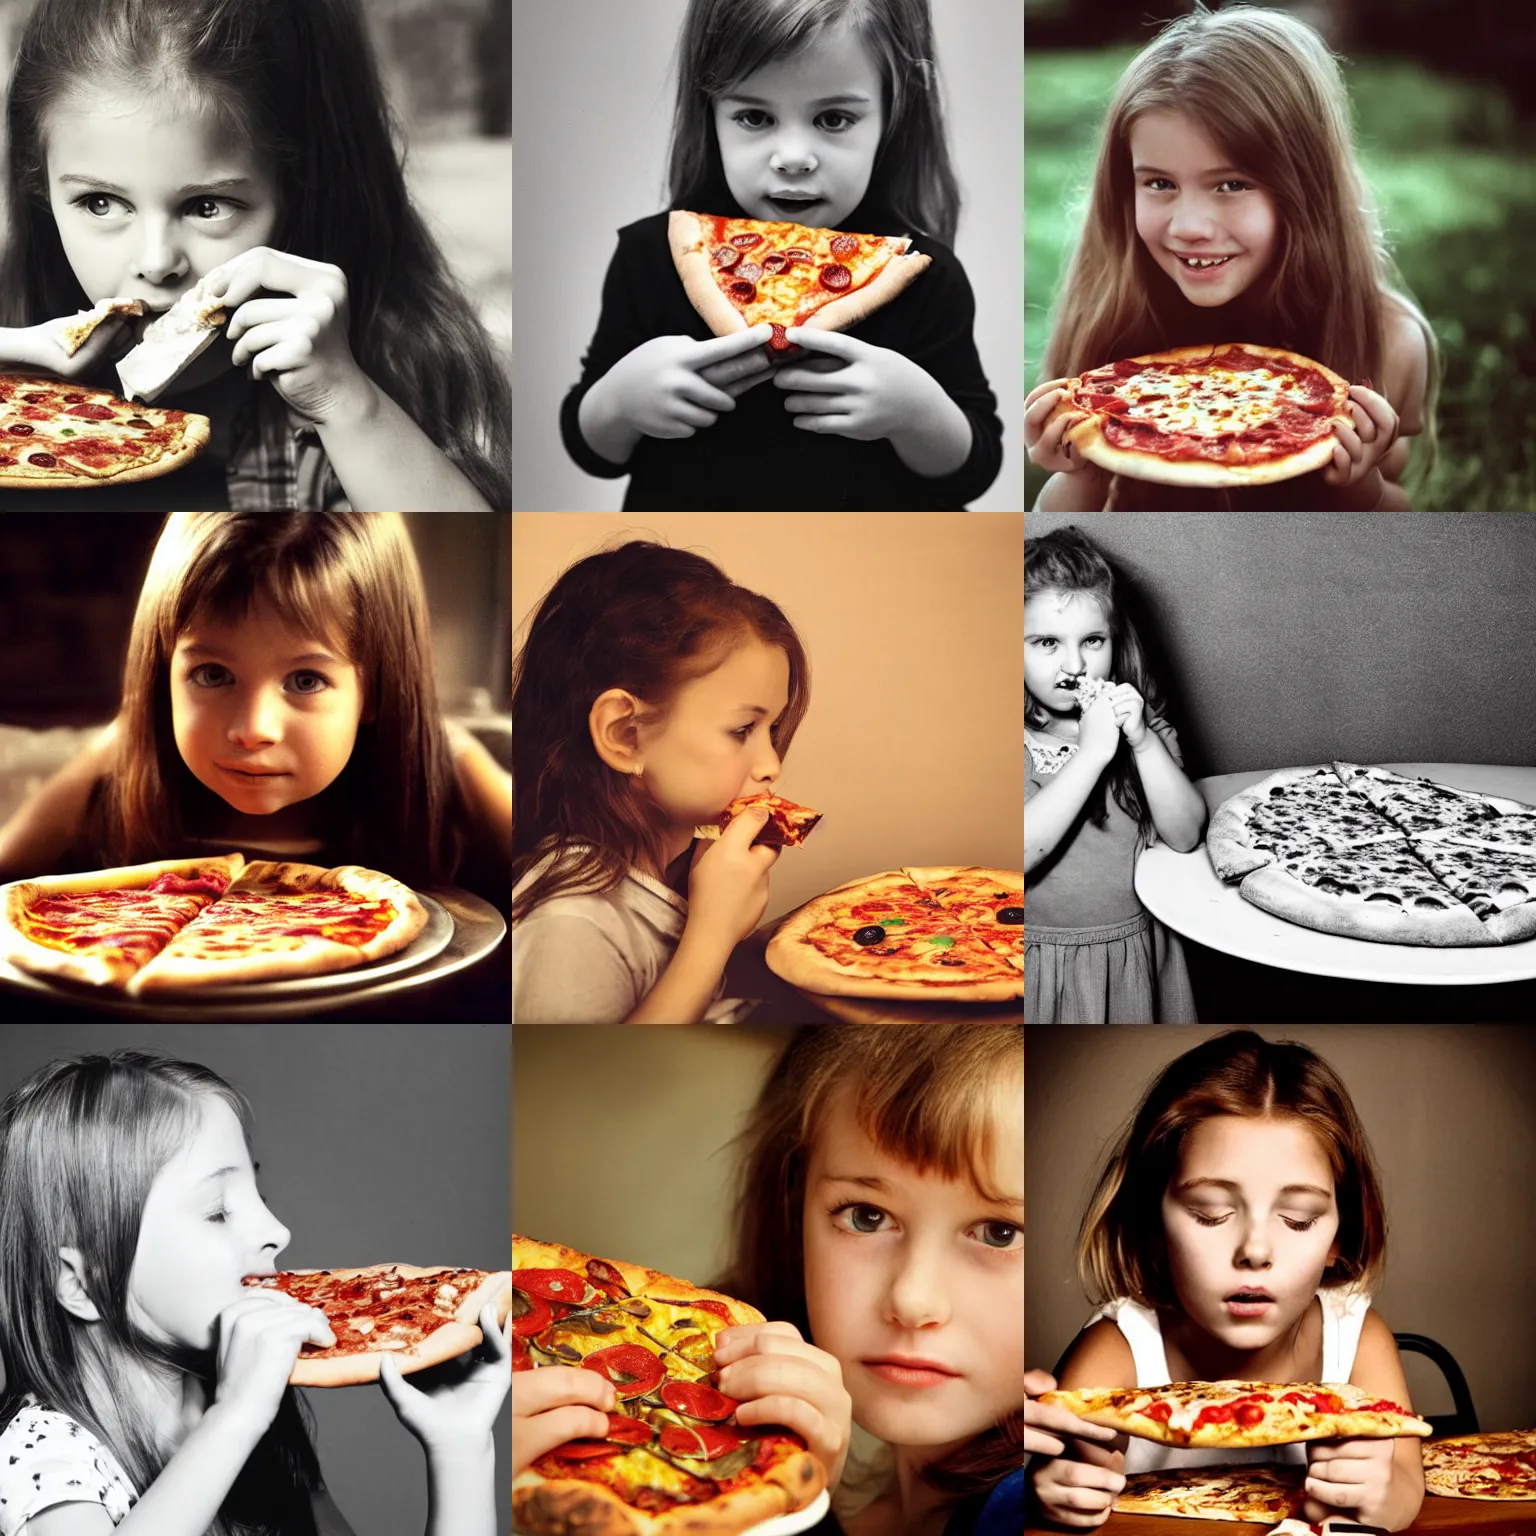 Prompt: a young girl eating a very tasty looking slice of pizza, 0 0 s movie, sepia